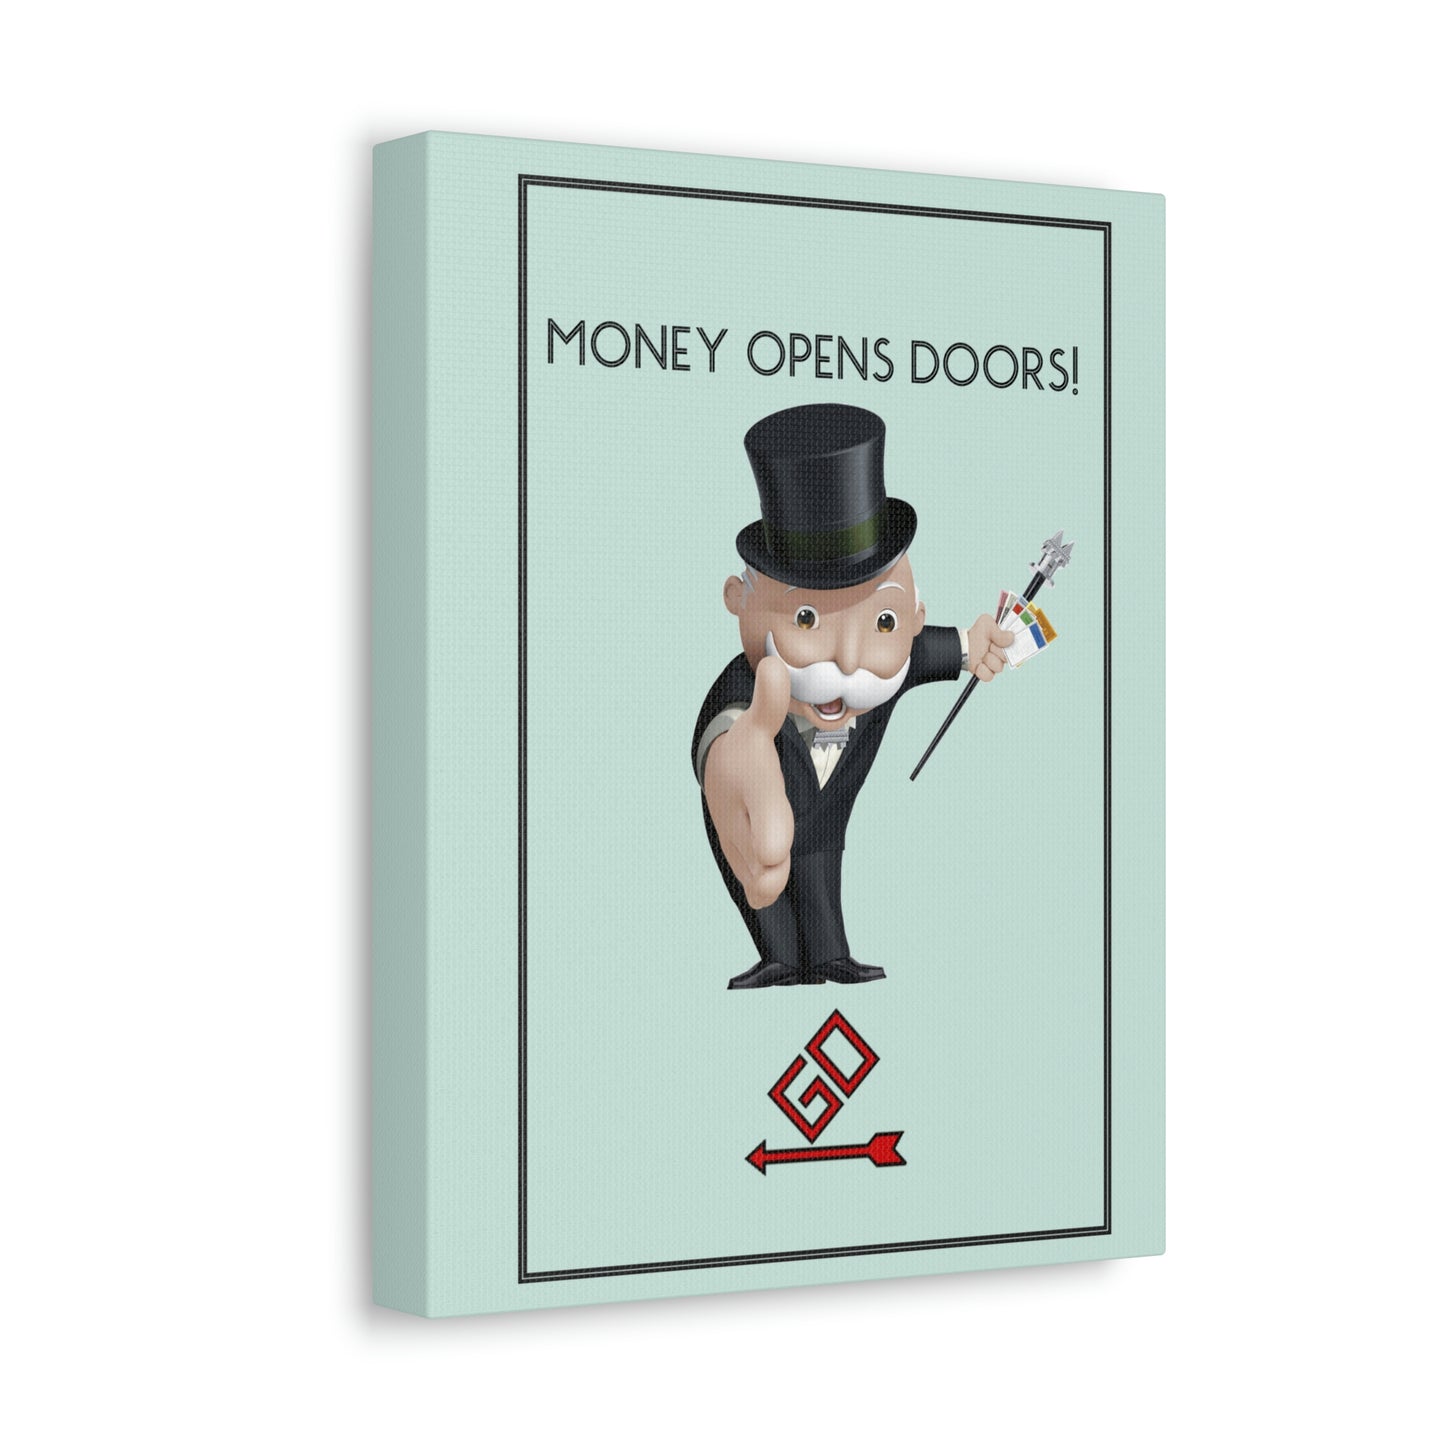 MONOPOLY MONEY OPENS DOORS - By SwimOrDrownUK - Satin Canvas - Stretched